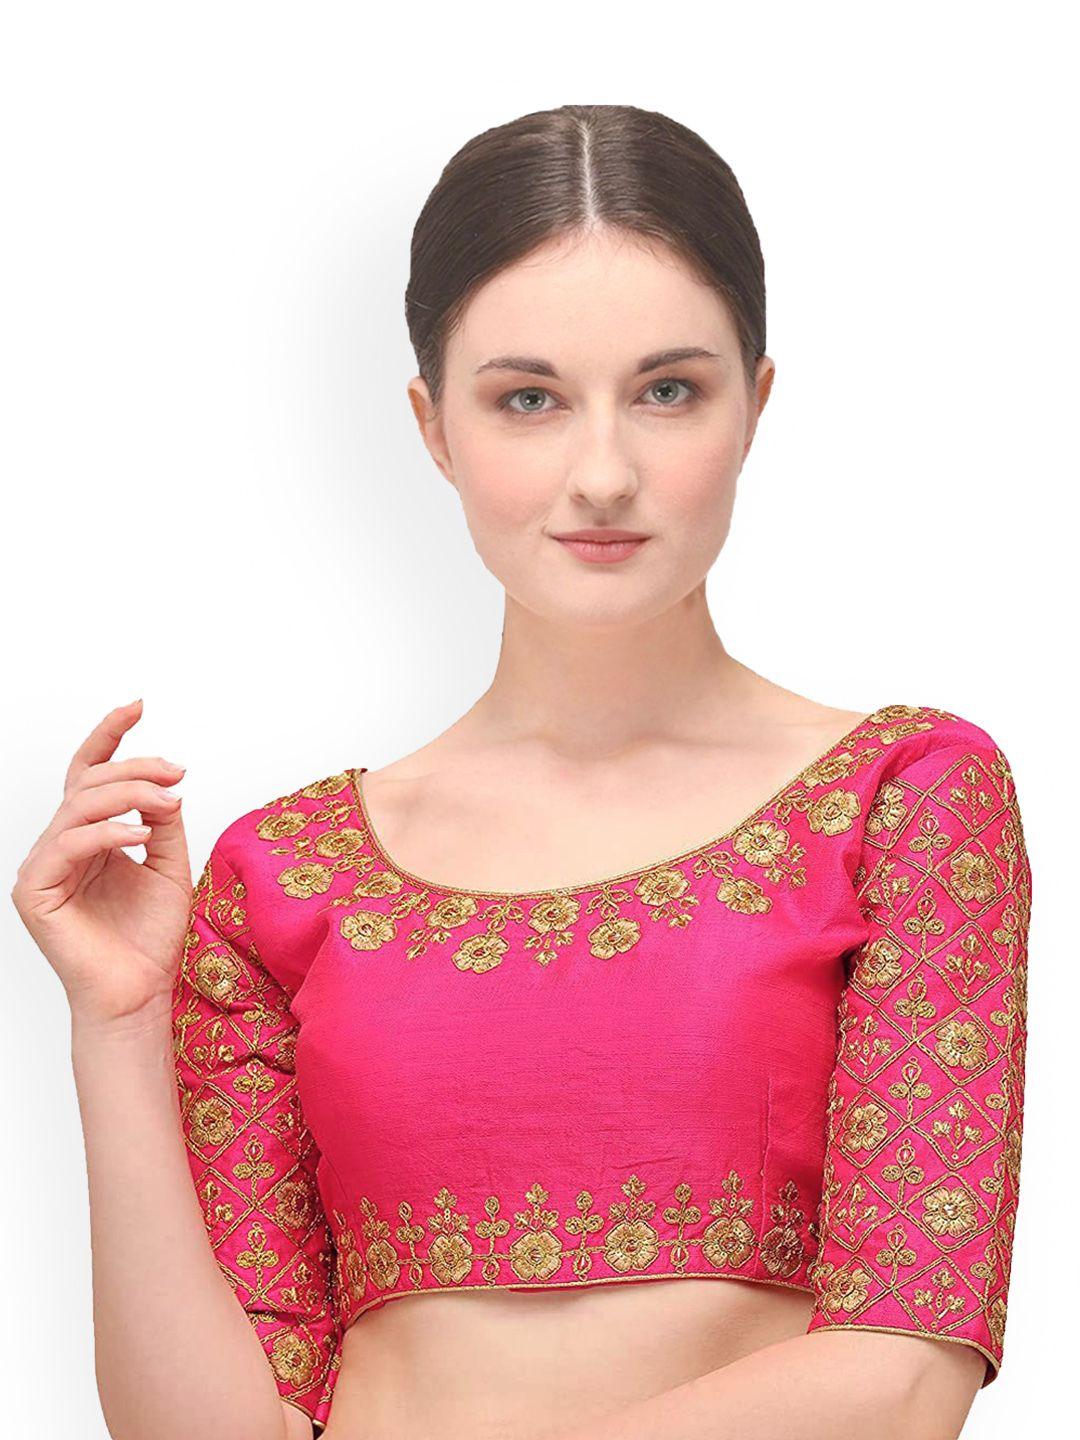 sumaira-tex-women-pink-&-gold-colored-embroidered-readymade-saree-blouse